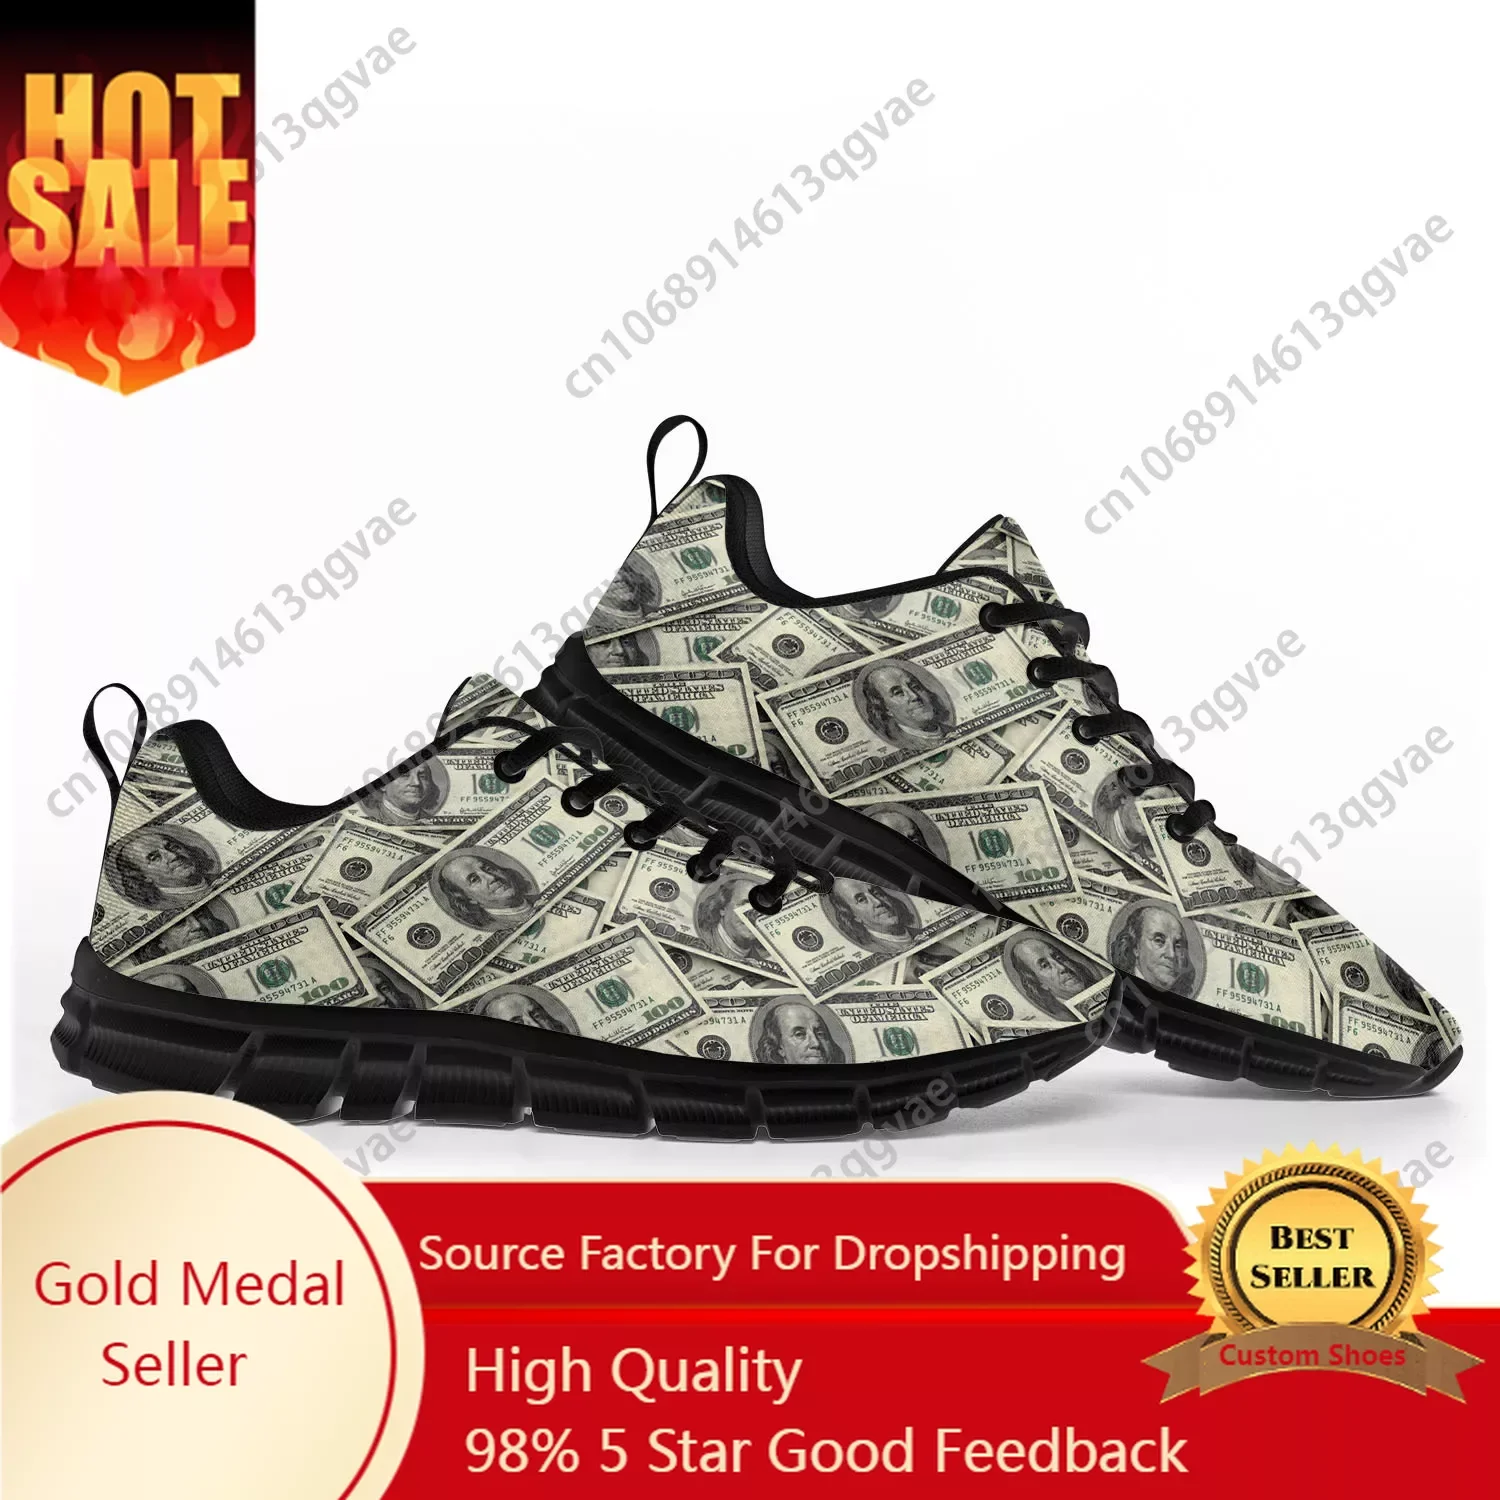 Dollar Printed Popular Sports Shoes Mens Womens Teenager Kids Children Sneakers Casual Custom High Quality Couple Shoes Black 2021 fashion style couple clothing beastars wolf printed popular oversize hoodies loose casual high quality popular cotton wears